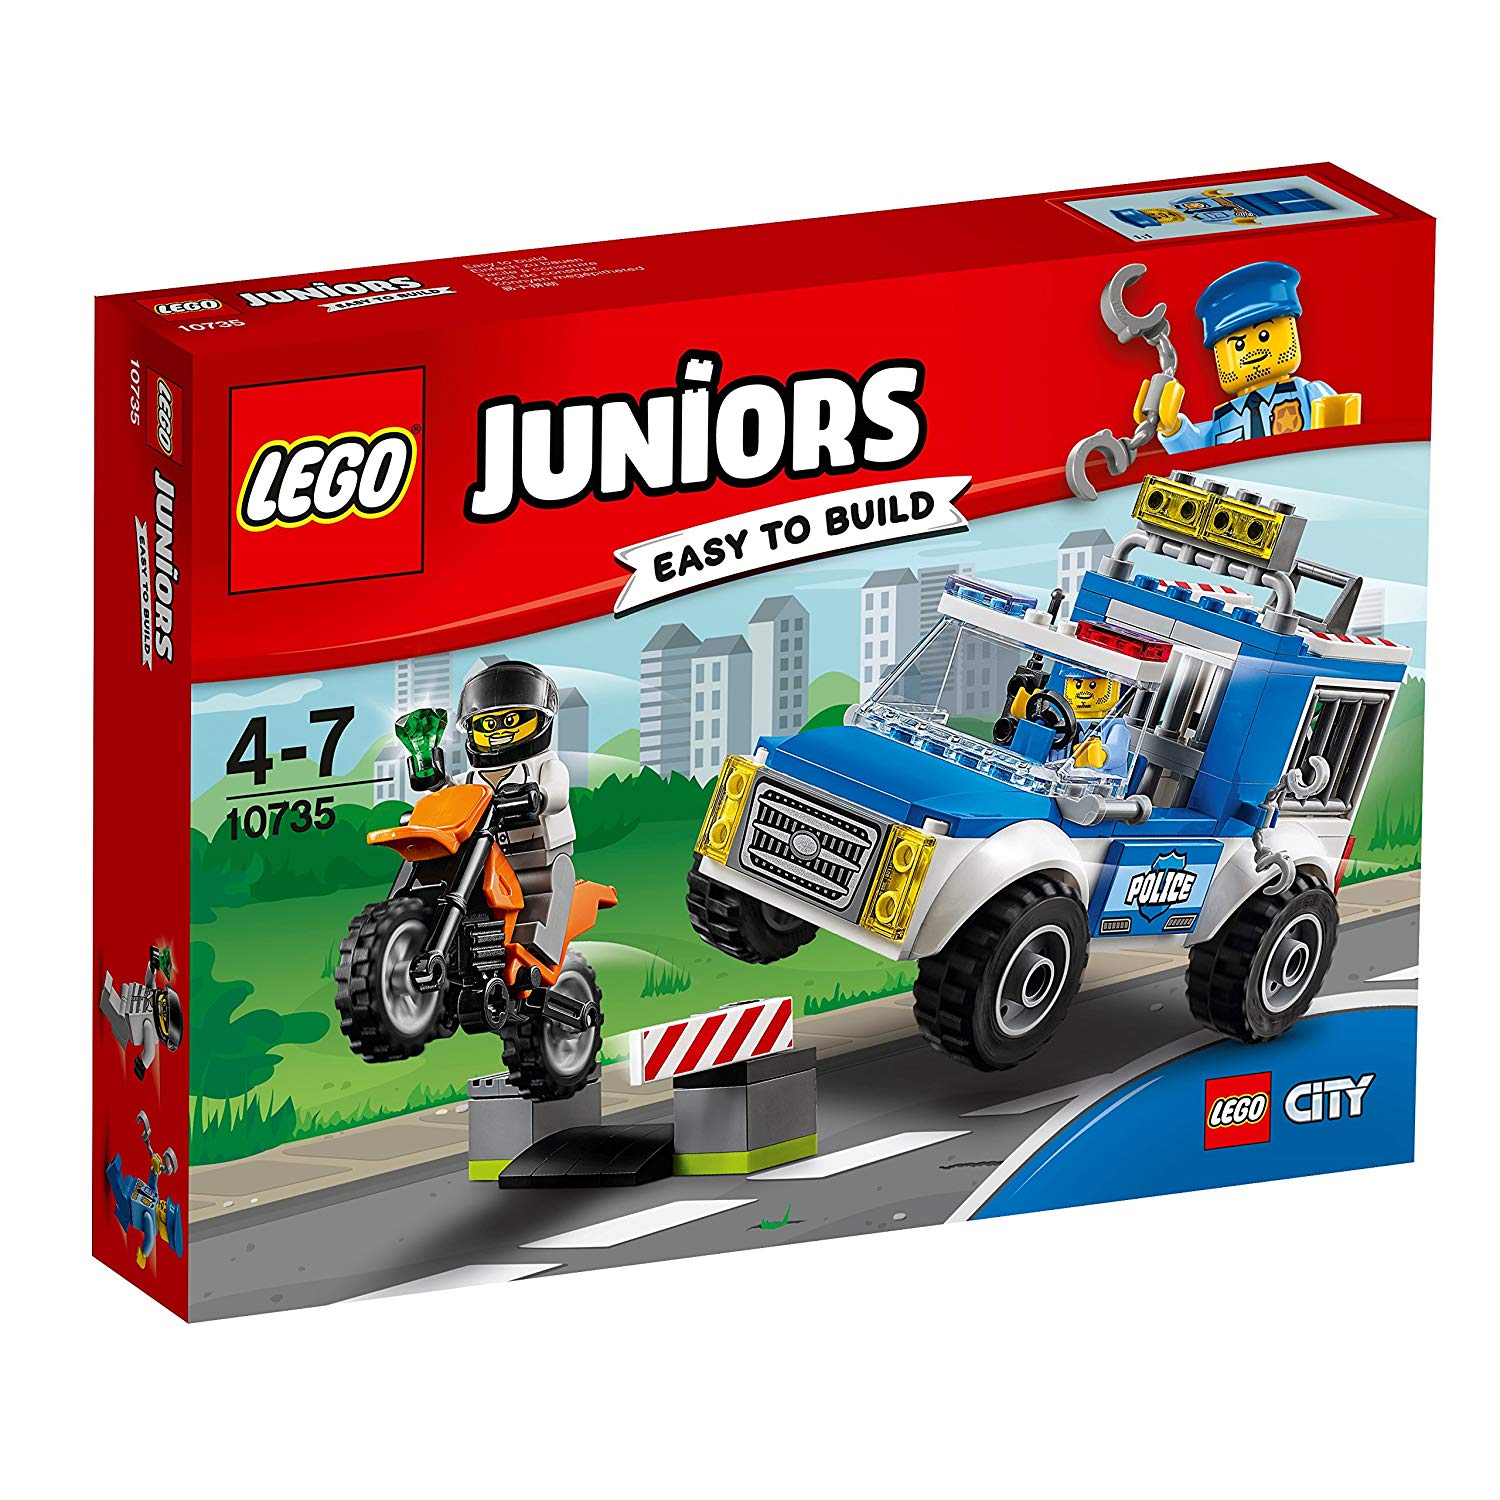 Lego Juniors Police On Criminals Hunting Toys For Years